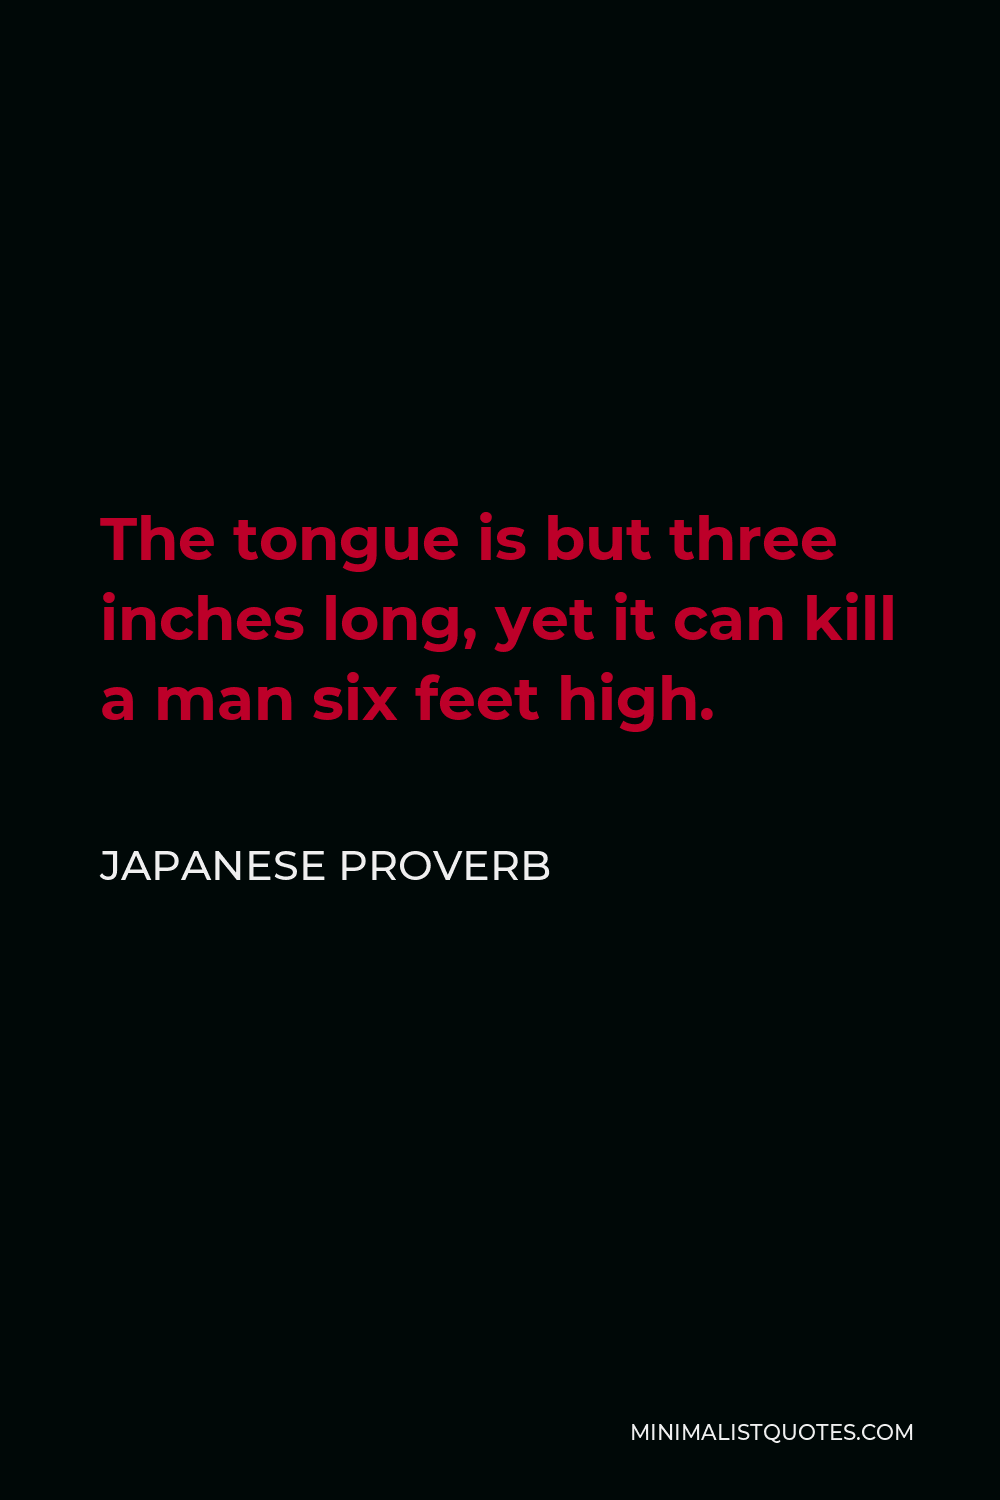 Japanese Proverb Quote - The tongue is but three inches long, yet it can kill a man six feet high.